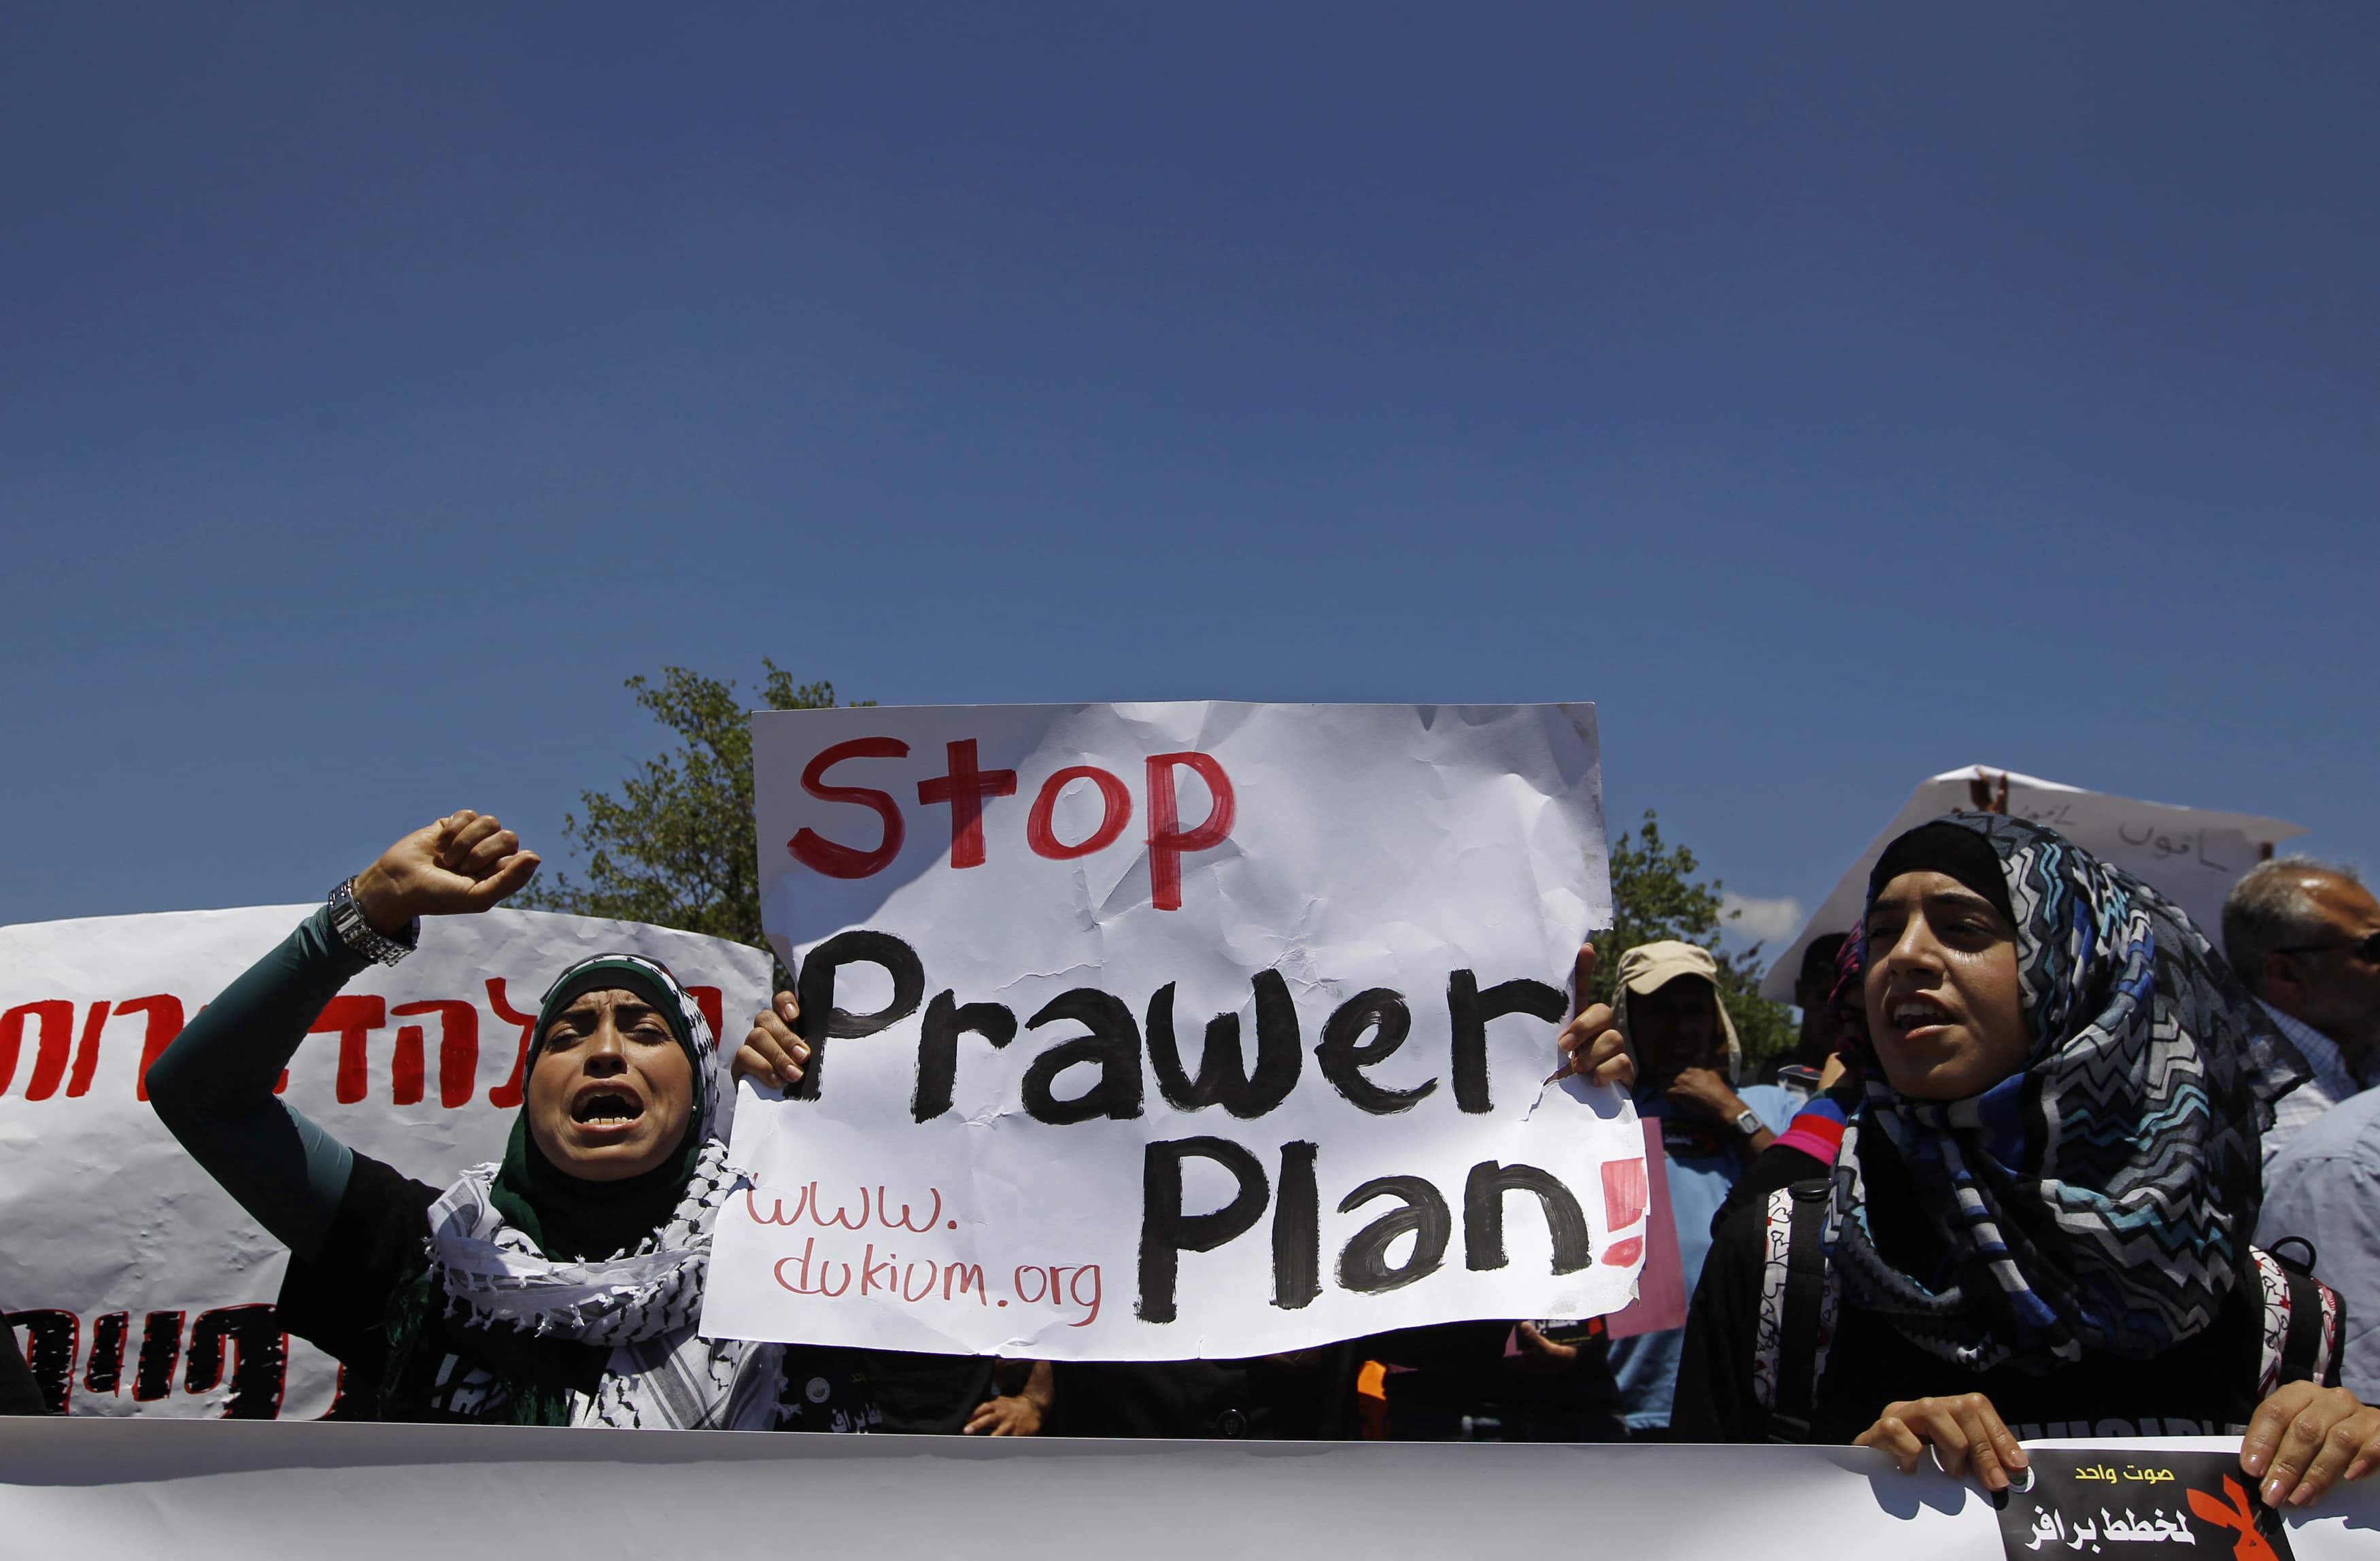 Bedouins hold signs as they take part in a protest against the Prawer Plan in the Negev desert, REUTERS/Ammar Awad